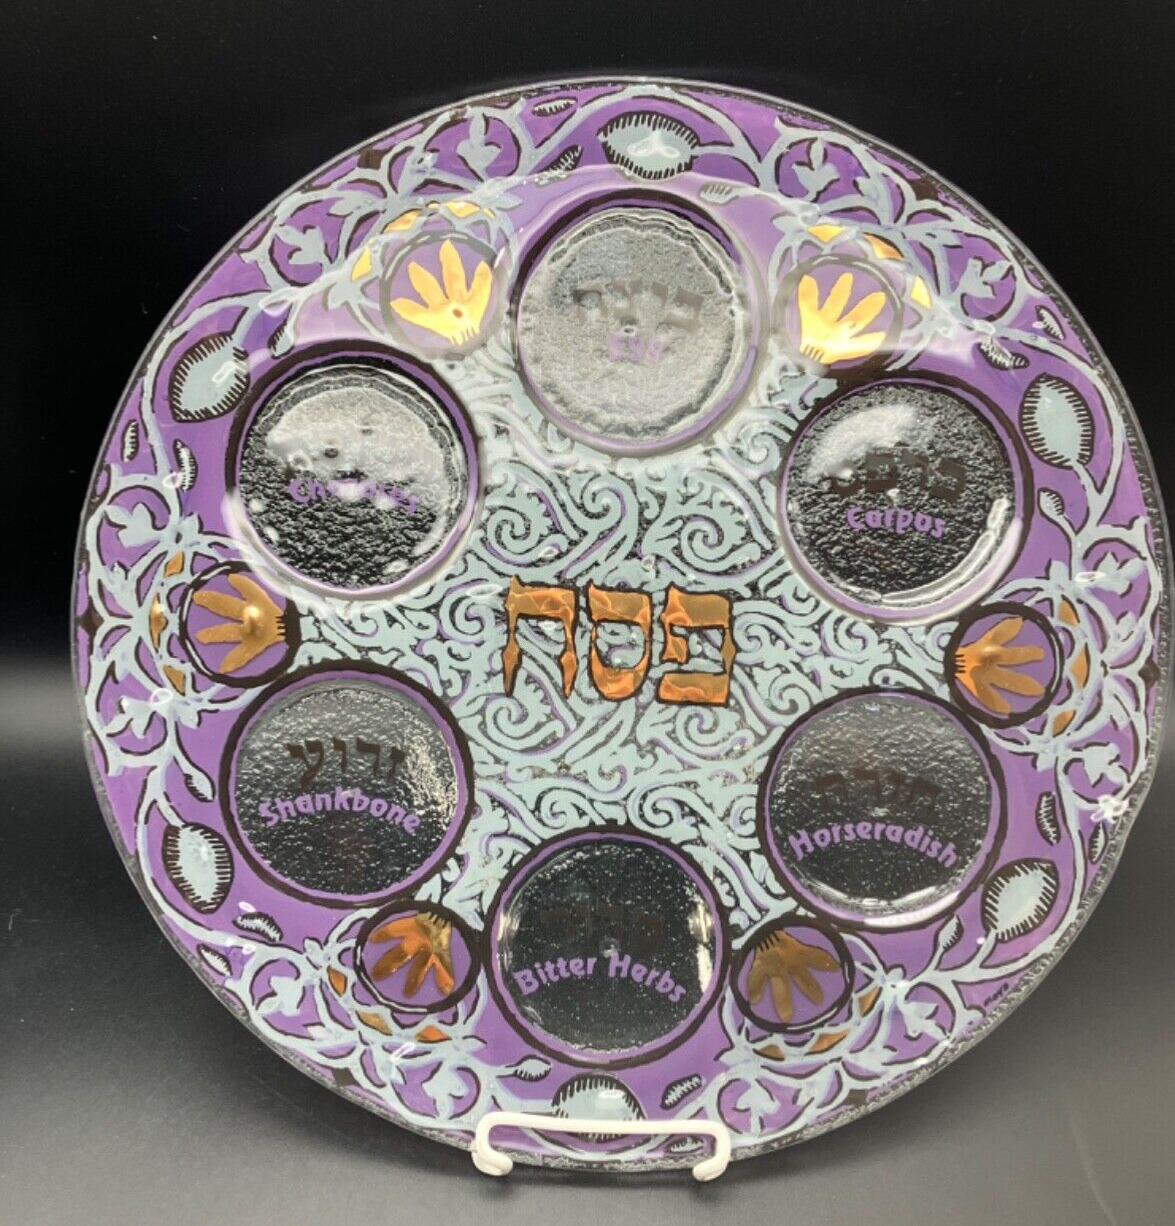 Unique Large Painted Fused Art Glass Seder Plate for Passover Judaica